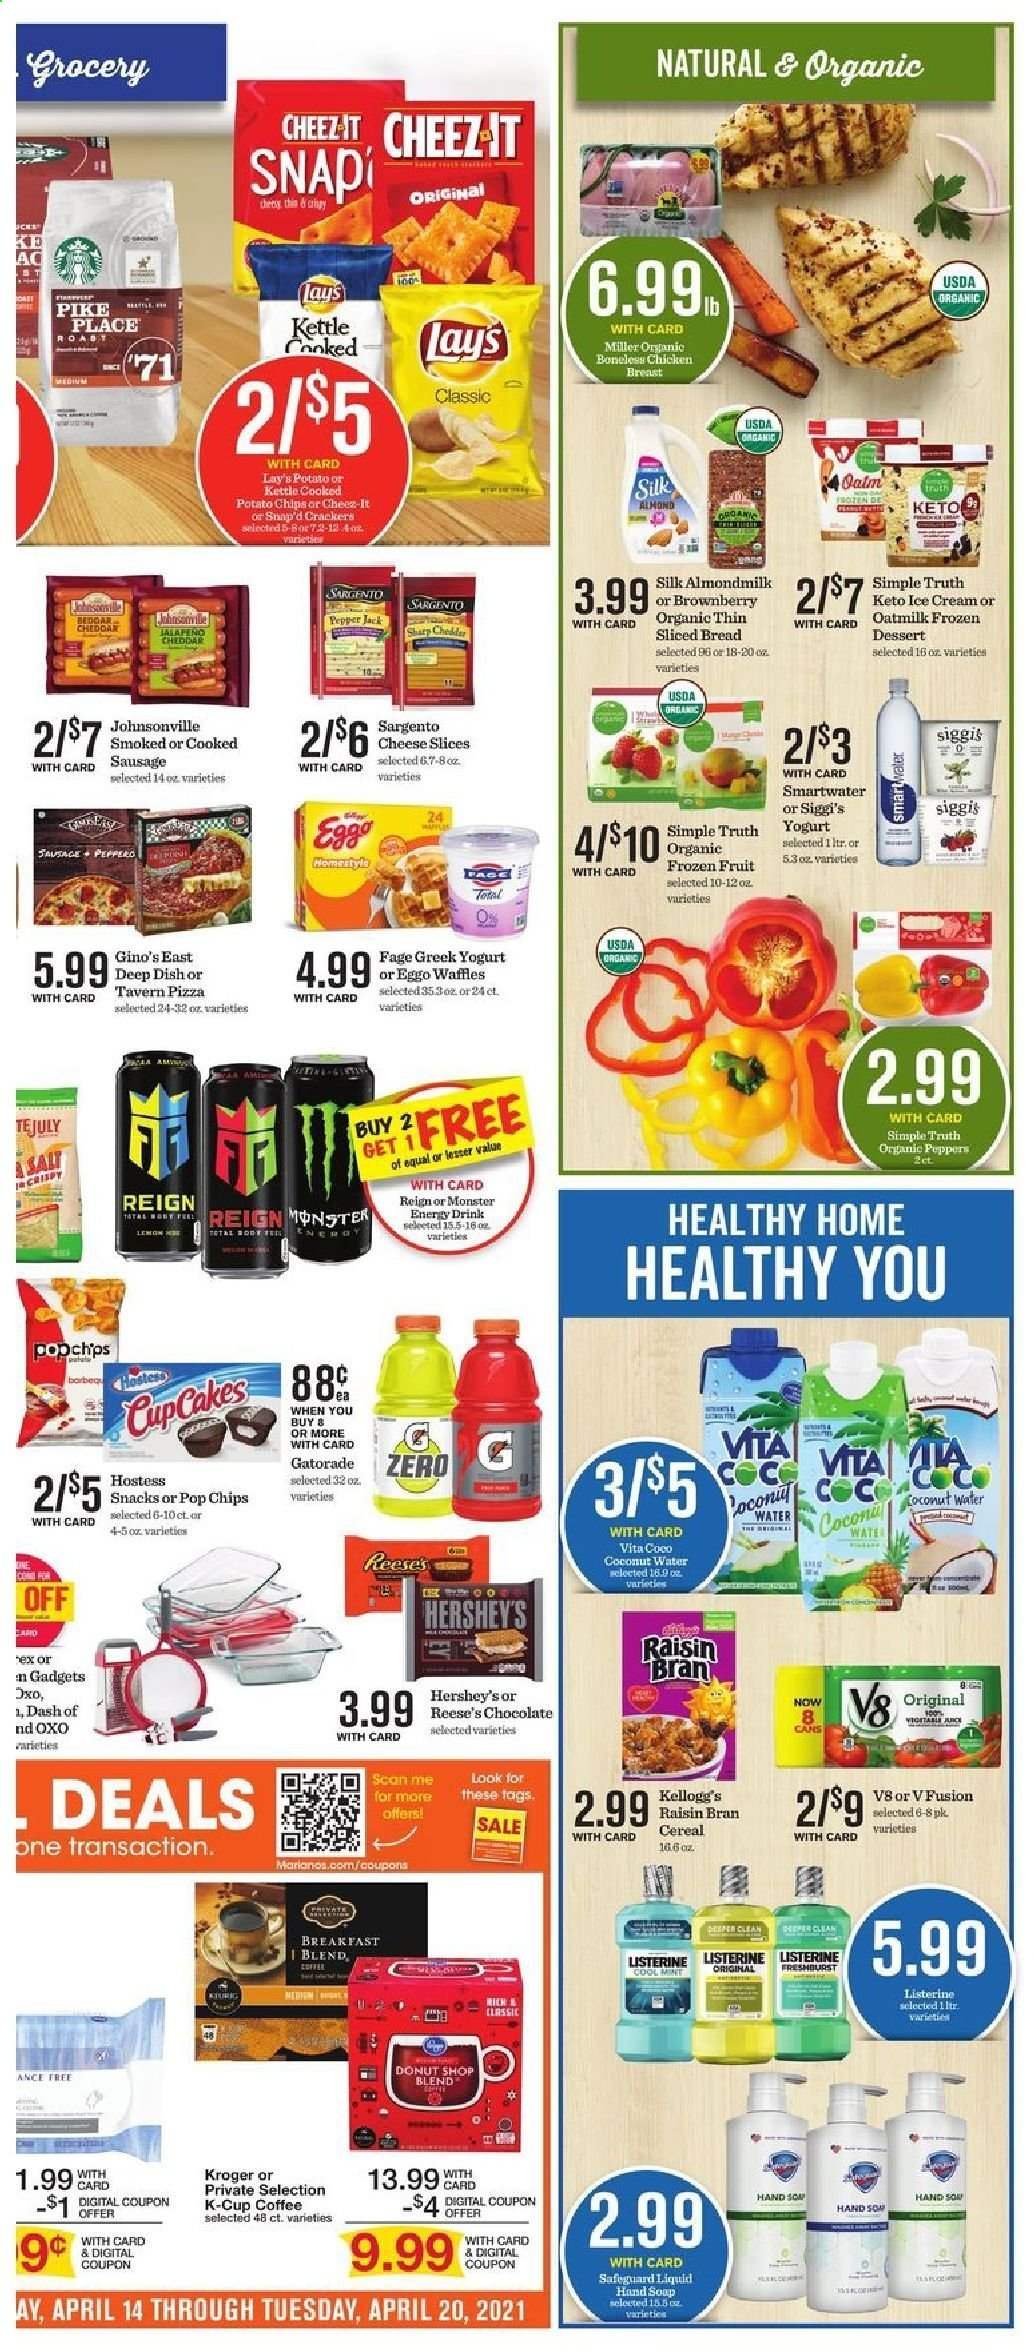 thumbnail - Mariano’s Flyer - 04/14/2021 - 04/20/2021 - Sales products - bread, cupcake, waffles, jalapeño, pizza, soup, Johnsonville, sausage, sliced cheese, Pepper Jack cheese, Sargento, greek yoghurt, yoghurt, almond milk, oat milk, eggs, ice cream, Reese's, Hershey's, Enlightened lce Cream, organic frozen fruit, chocolate, snack, crackers, Kellogg's, Lay’s, Cheez-It, salt, cereals, Raisin Bran, energy drink, Monster, coconut water, Monster Energy, Gatorade, coffee, coffee capsules, K-Cups, Miller, chicken breasts, peppers. Page 5.